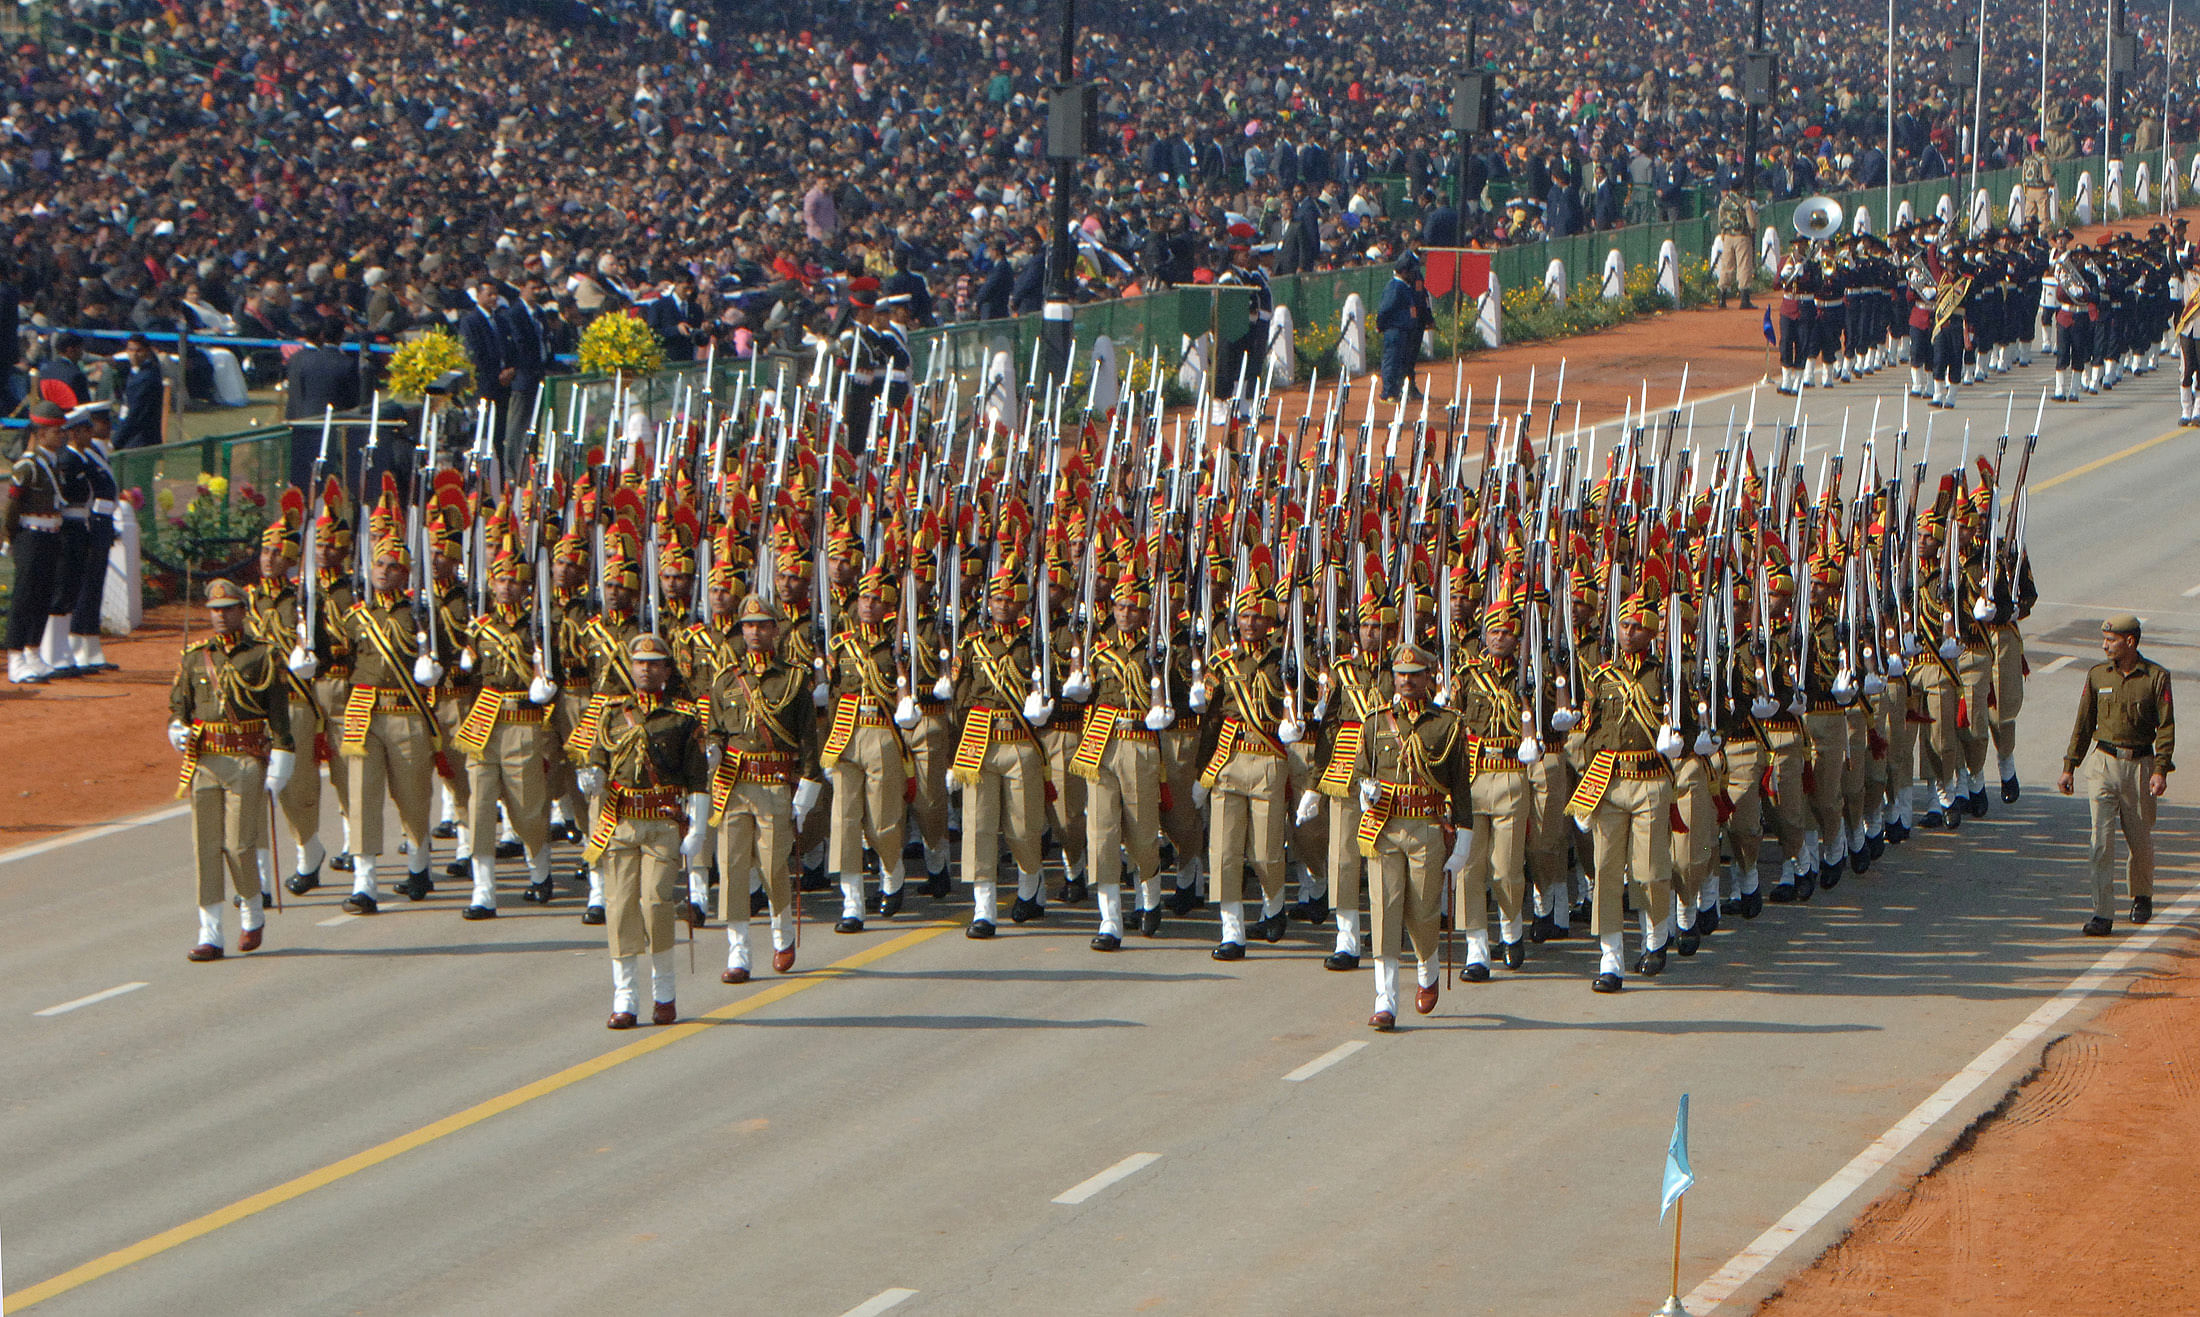 Delhi Police Constables at Republic Day Parade. (Credit: Wikimedia Commons Photo)